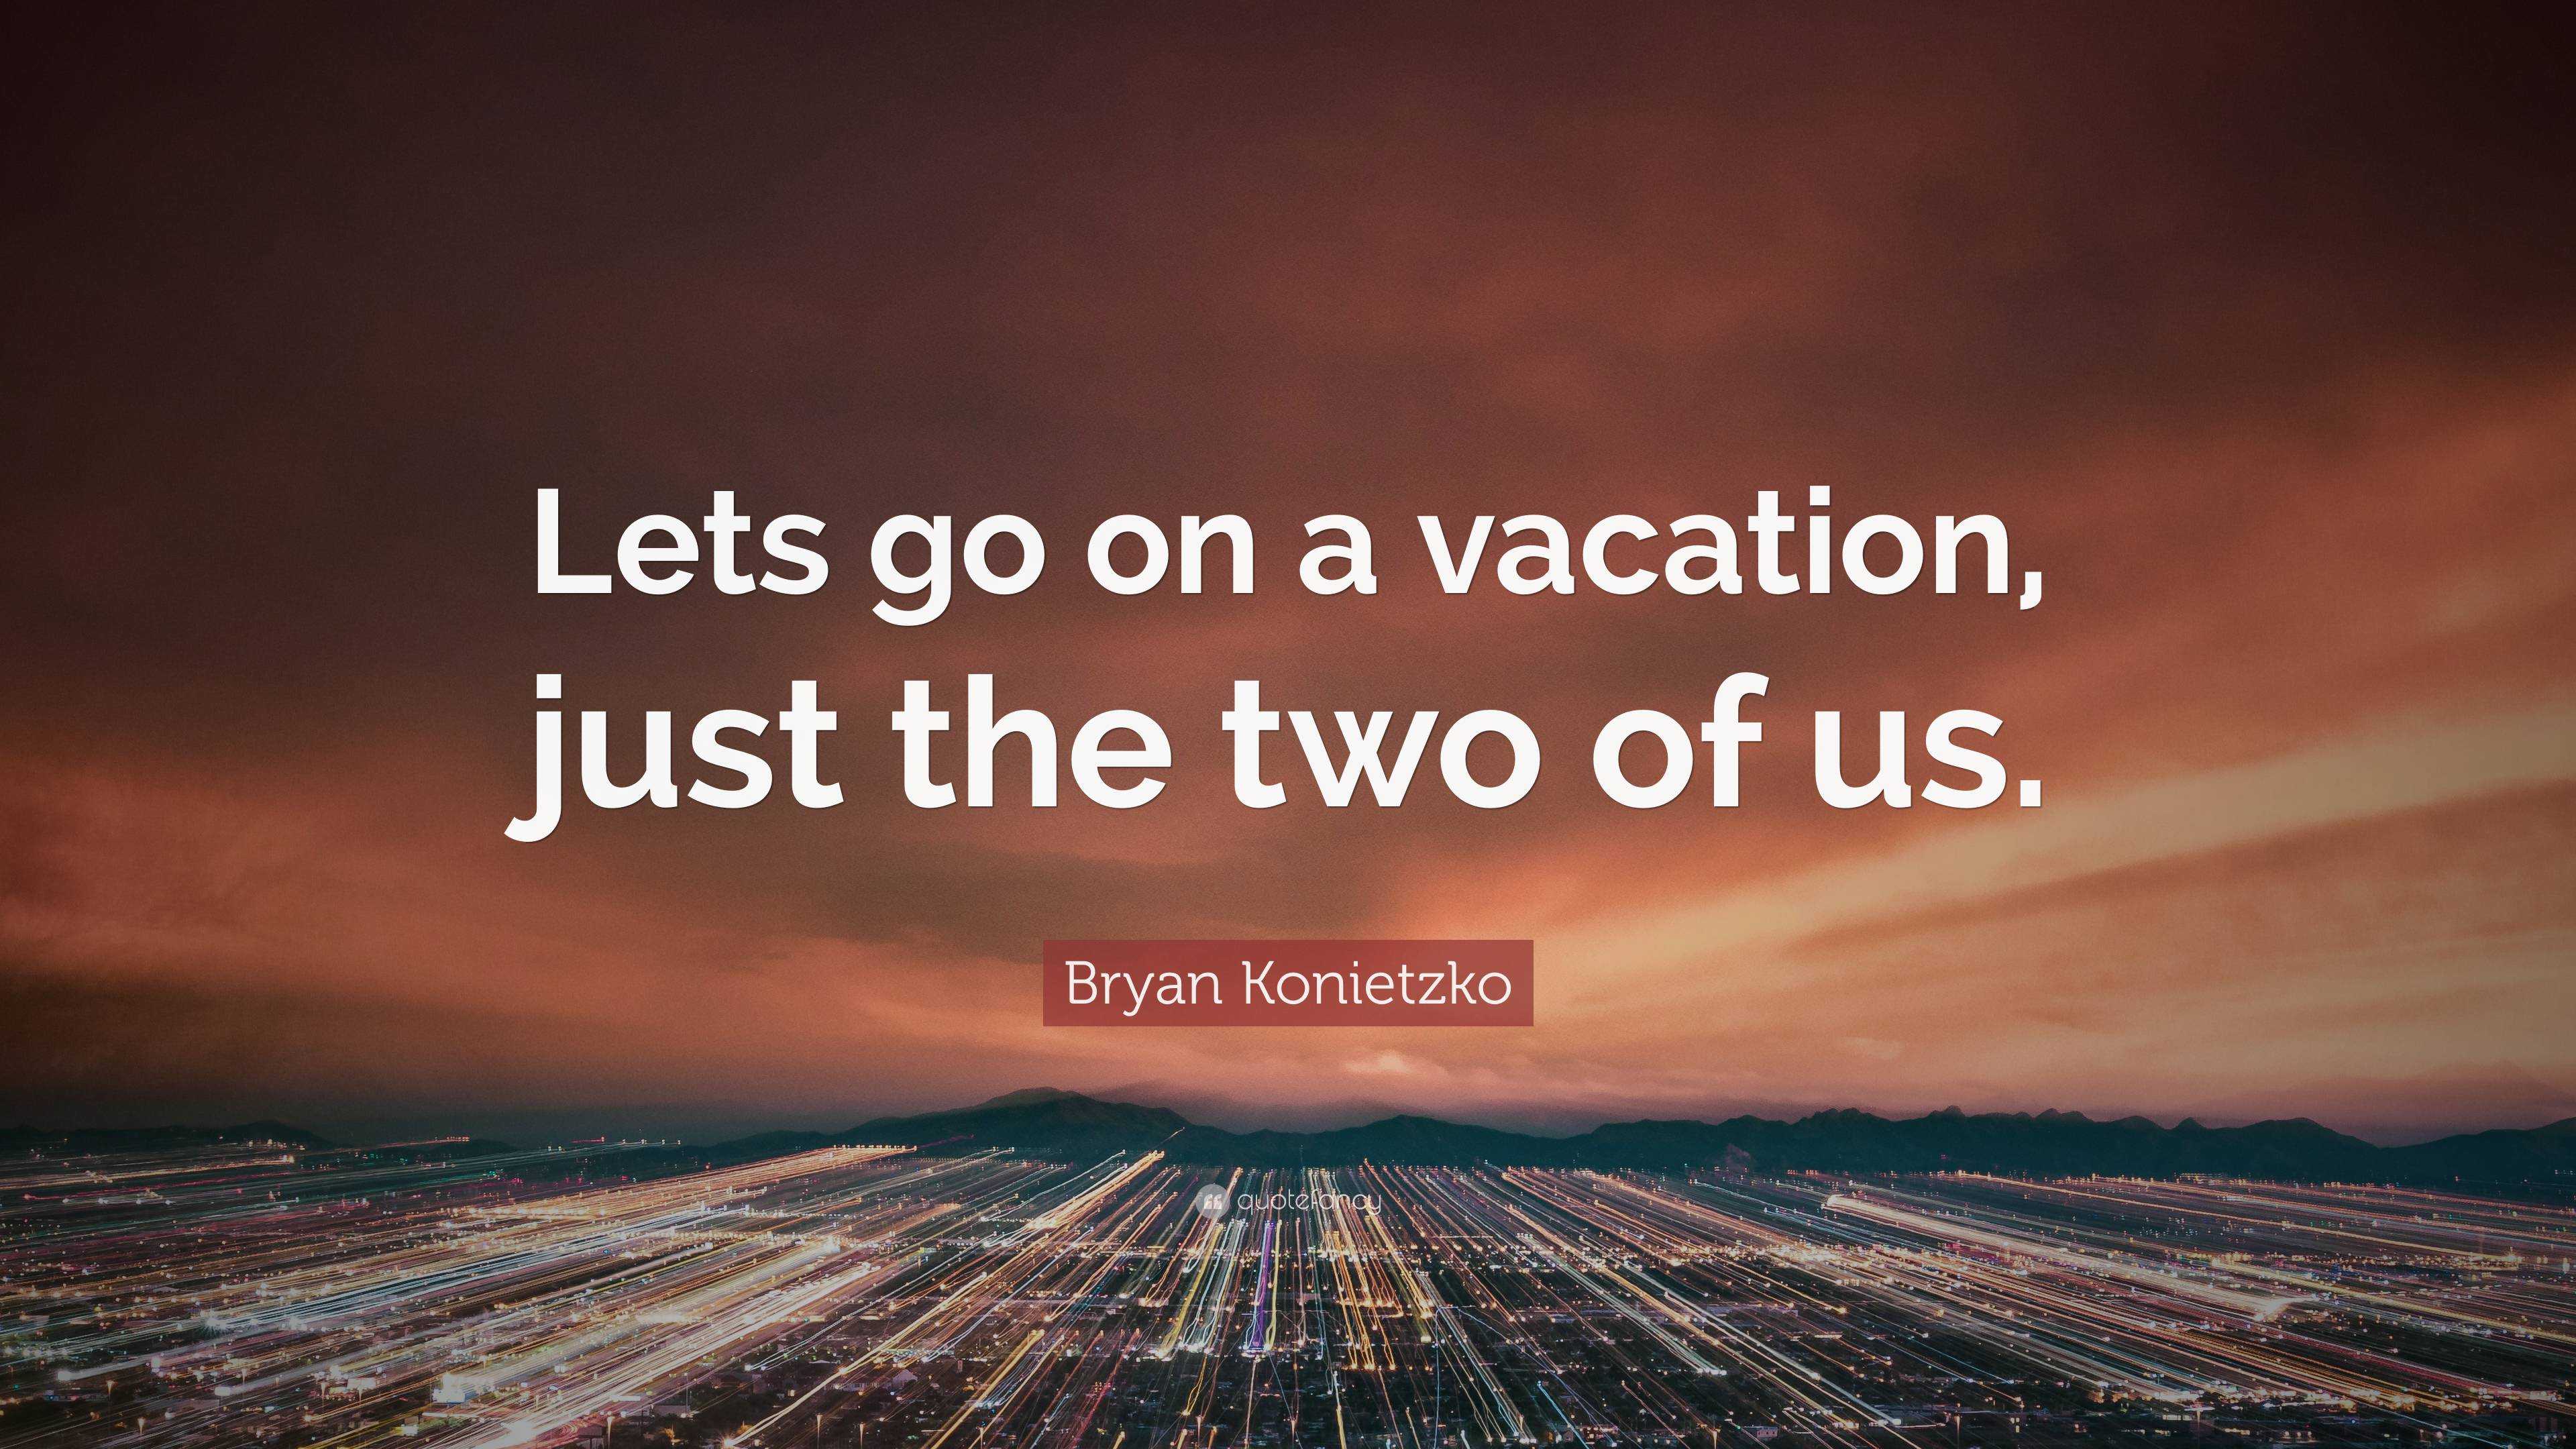 Bryan Konietzko Quote: “Lets go on a vacation, just the two of us.”